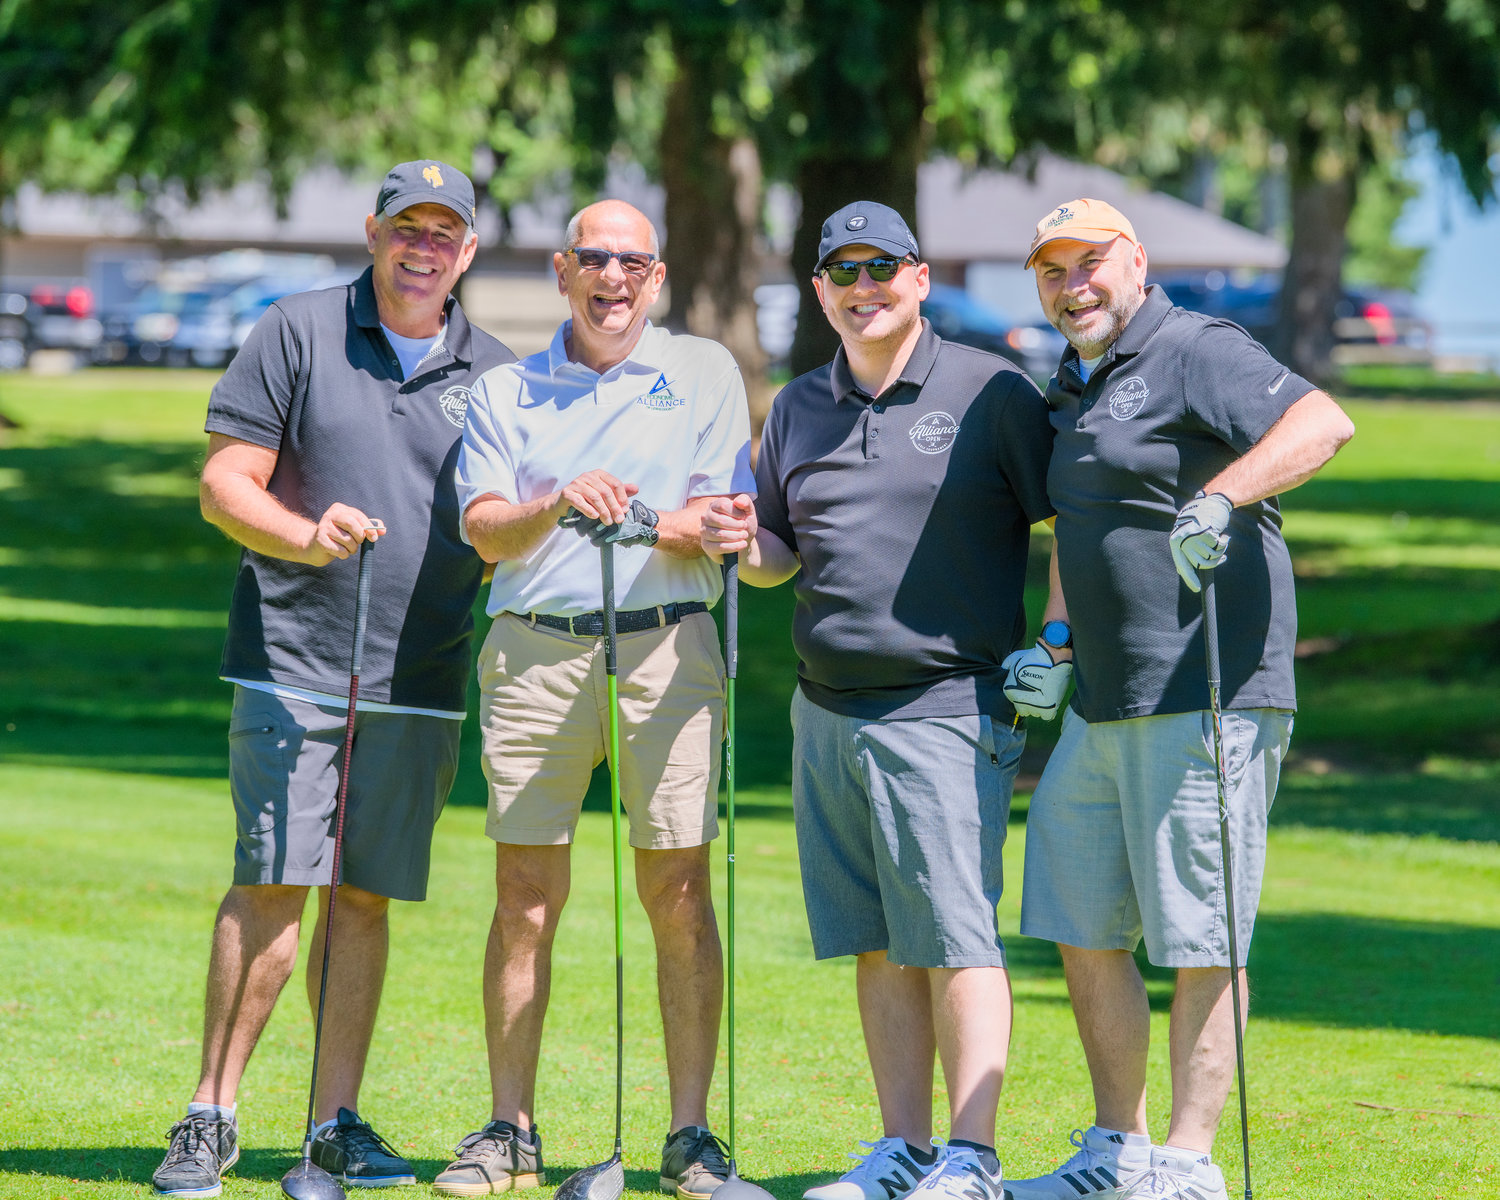 The Economic Alliance team poses for a photo Friday in Chehalis during a charity golf tournament.